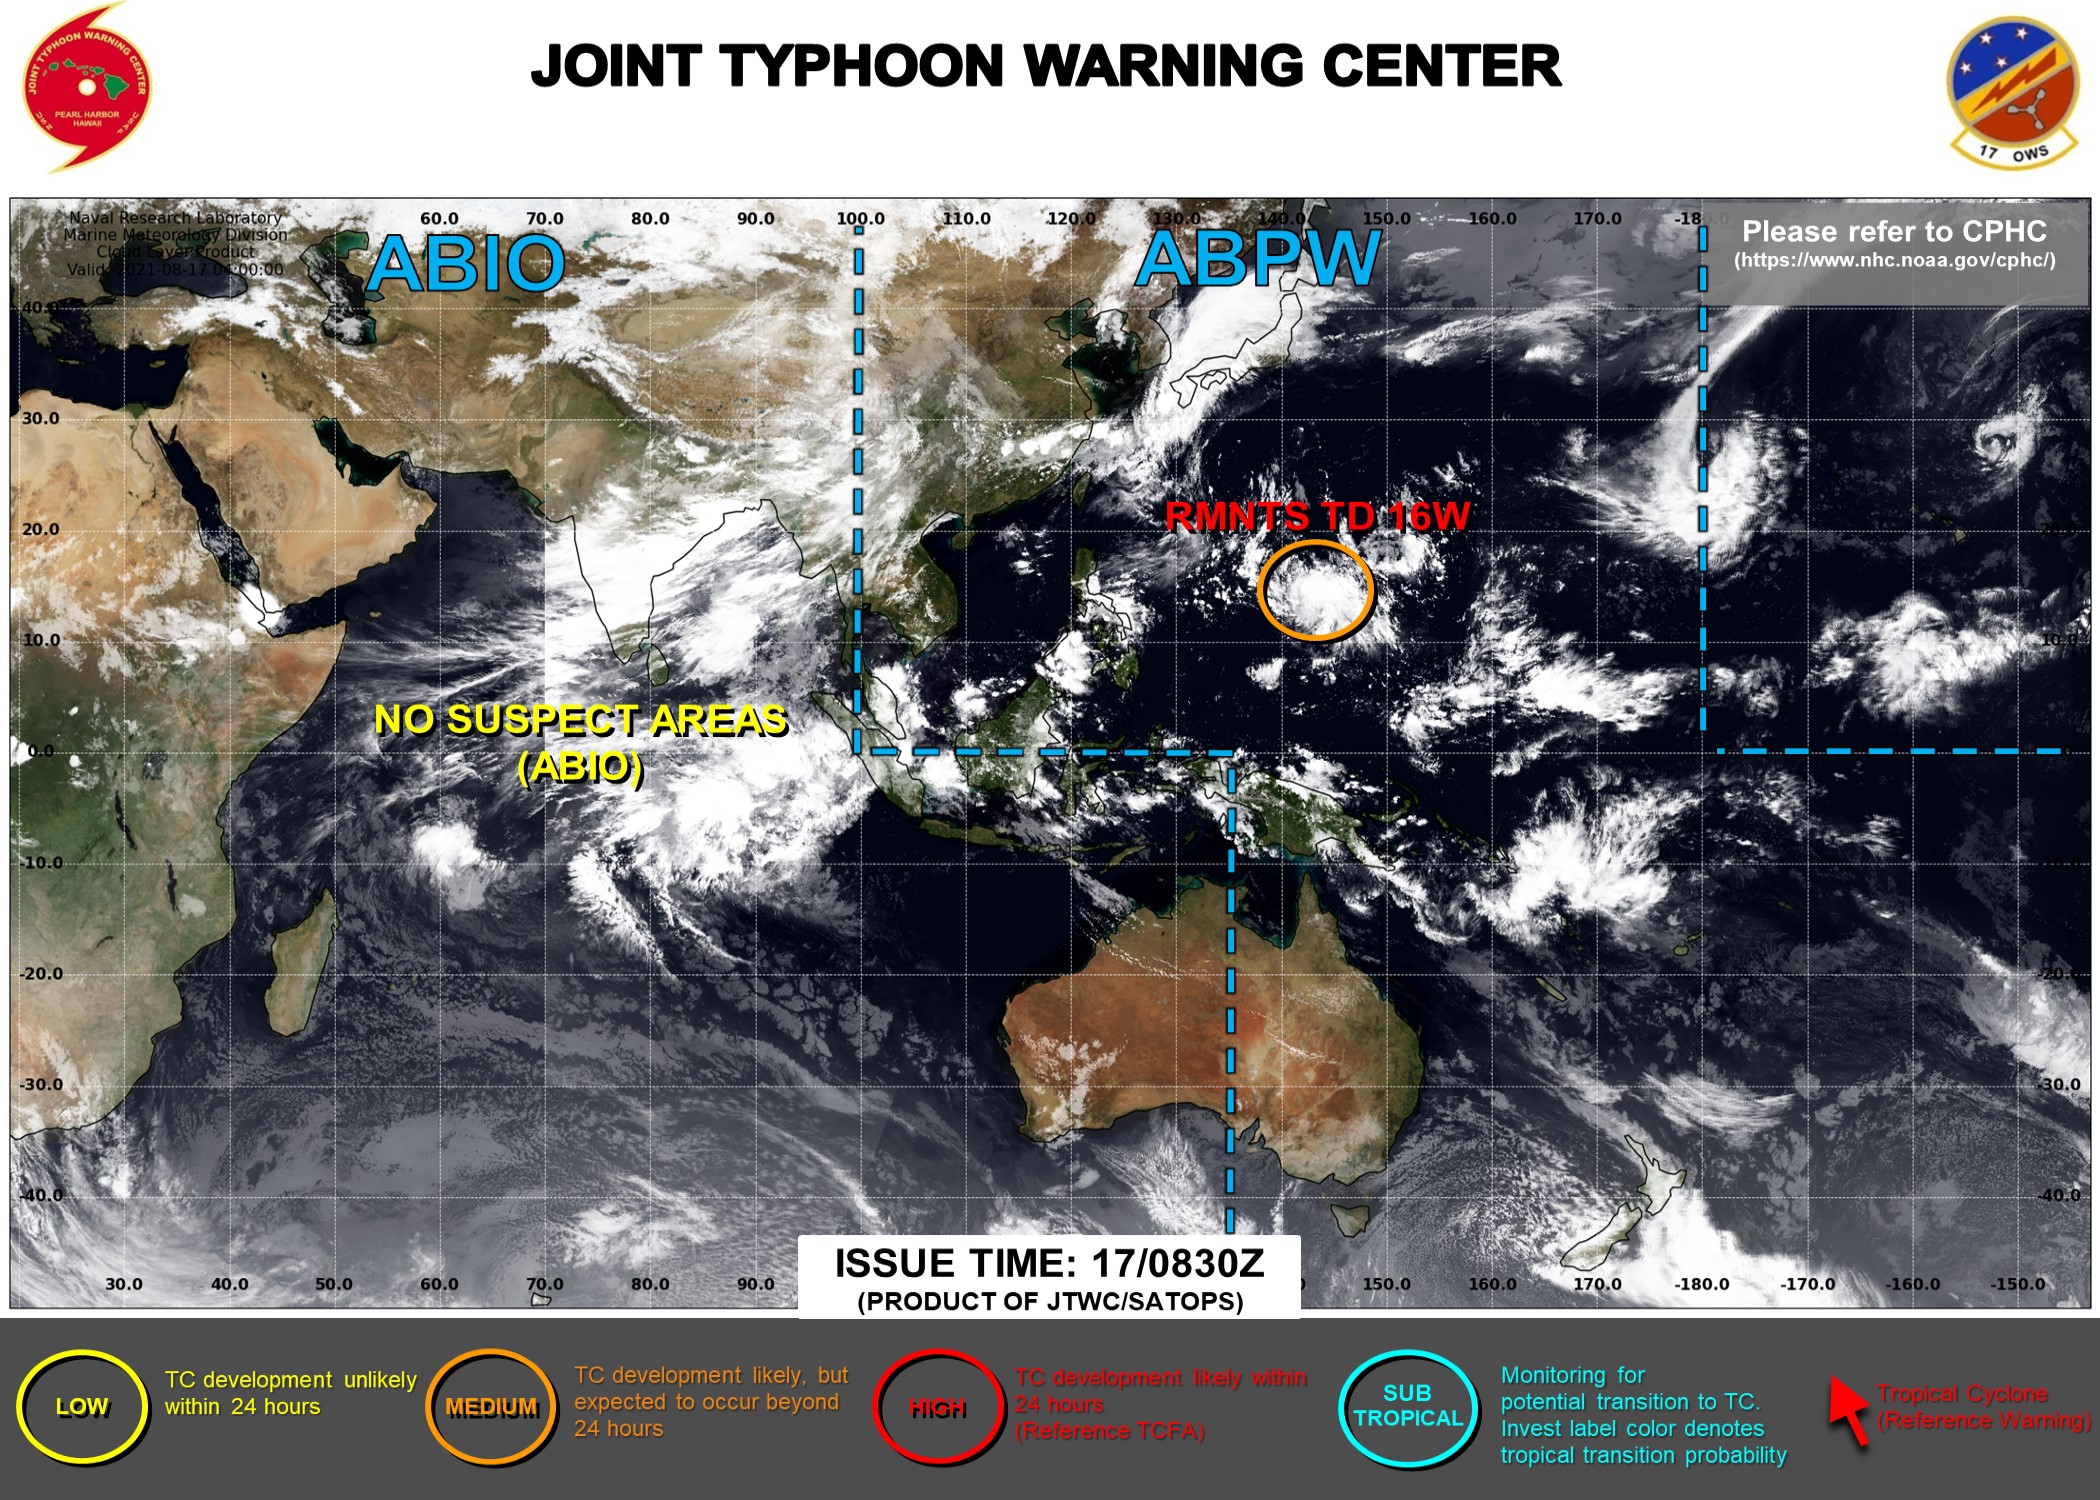 JTWC HAVE ISSUED WARNING 28/FINAL ON 16W AT 17/09UTC. THE SYSTEM IS DOWN-GRADED TO MEDIUM WITH MODERATE CHANCES OF REGENERATION. 3HOURLY SATELLITE BULLETINS ARE STILL ISSUED ON IT.